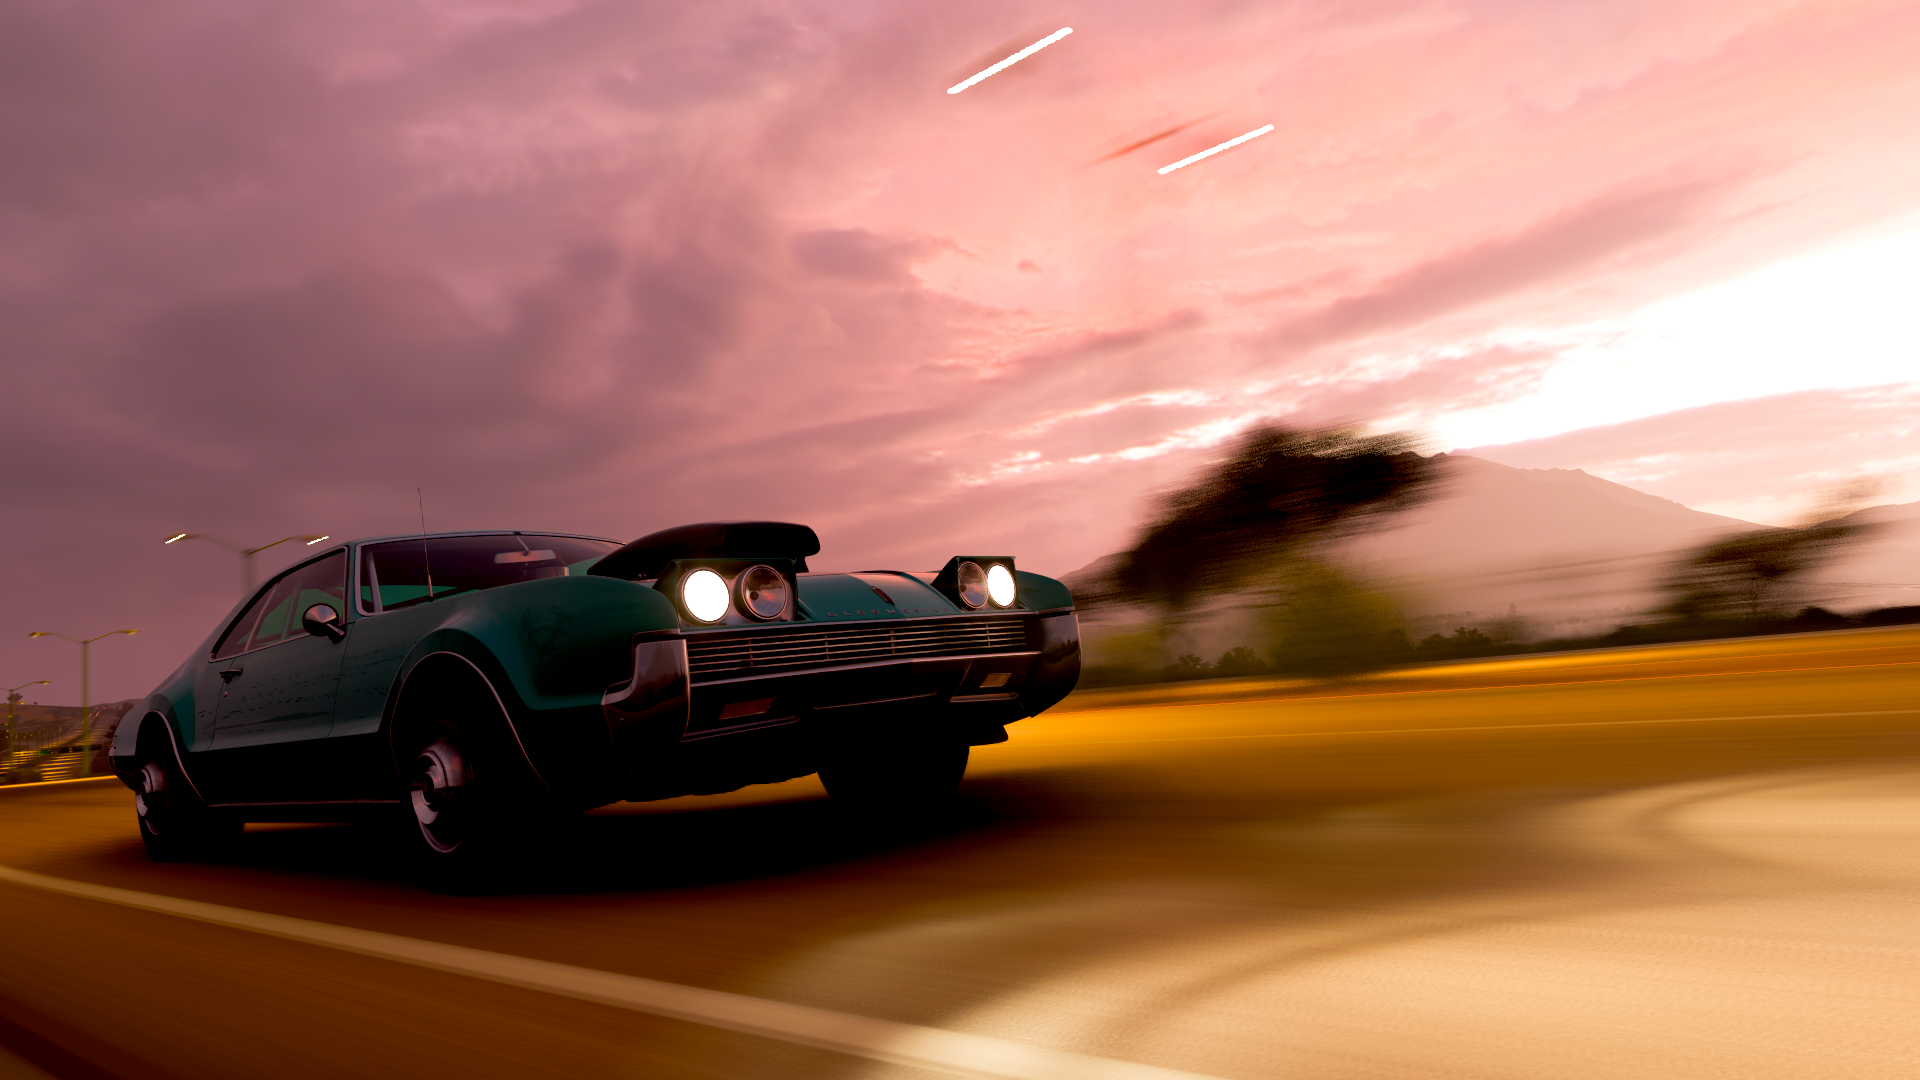 General 1920x1080 Forza Horizon 5 PC gaming muscle cars American cars PlaygroundGames vehicle video game art screen shot headlights Oldsmobile car pop-up headlights video games frontal view motion blur clouds blurred driving sky